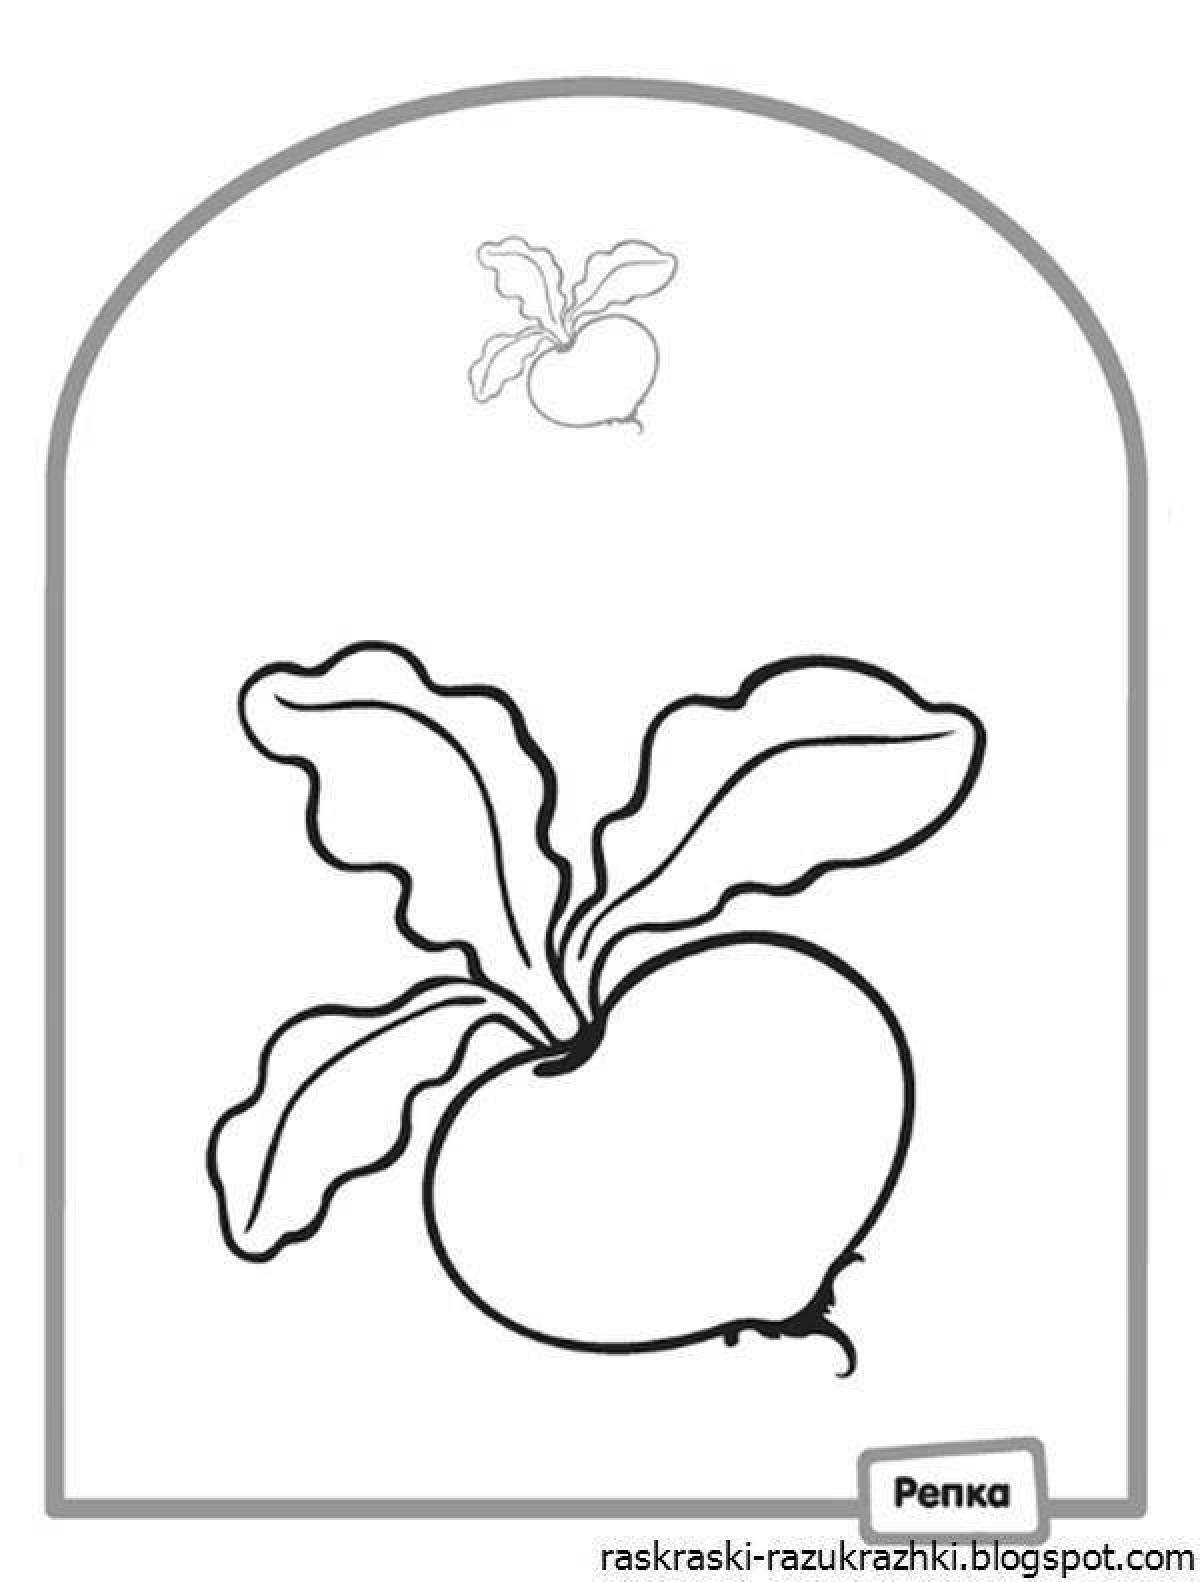 Playful turnip coloring page for kids